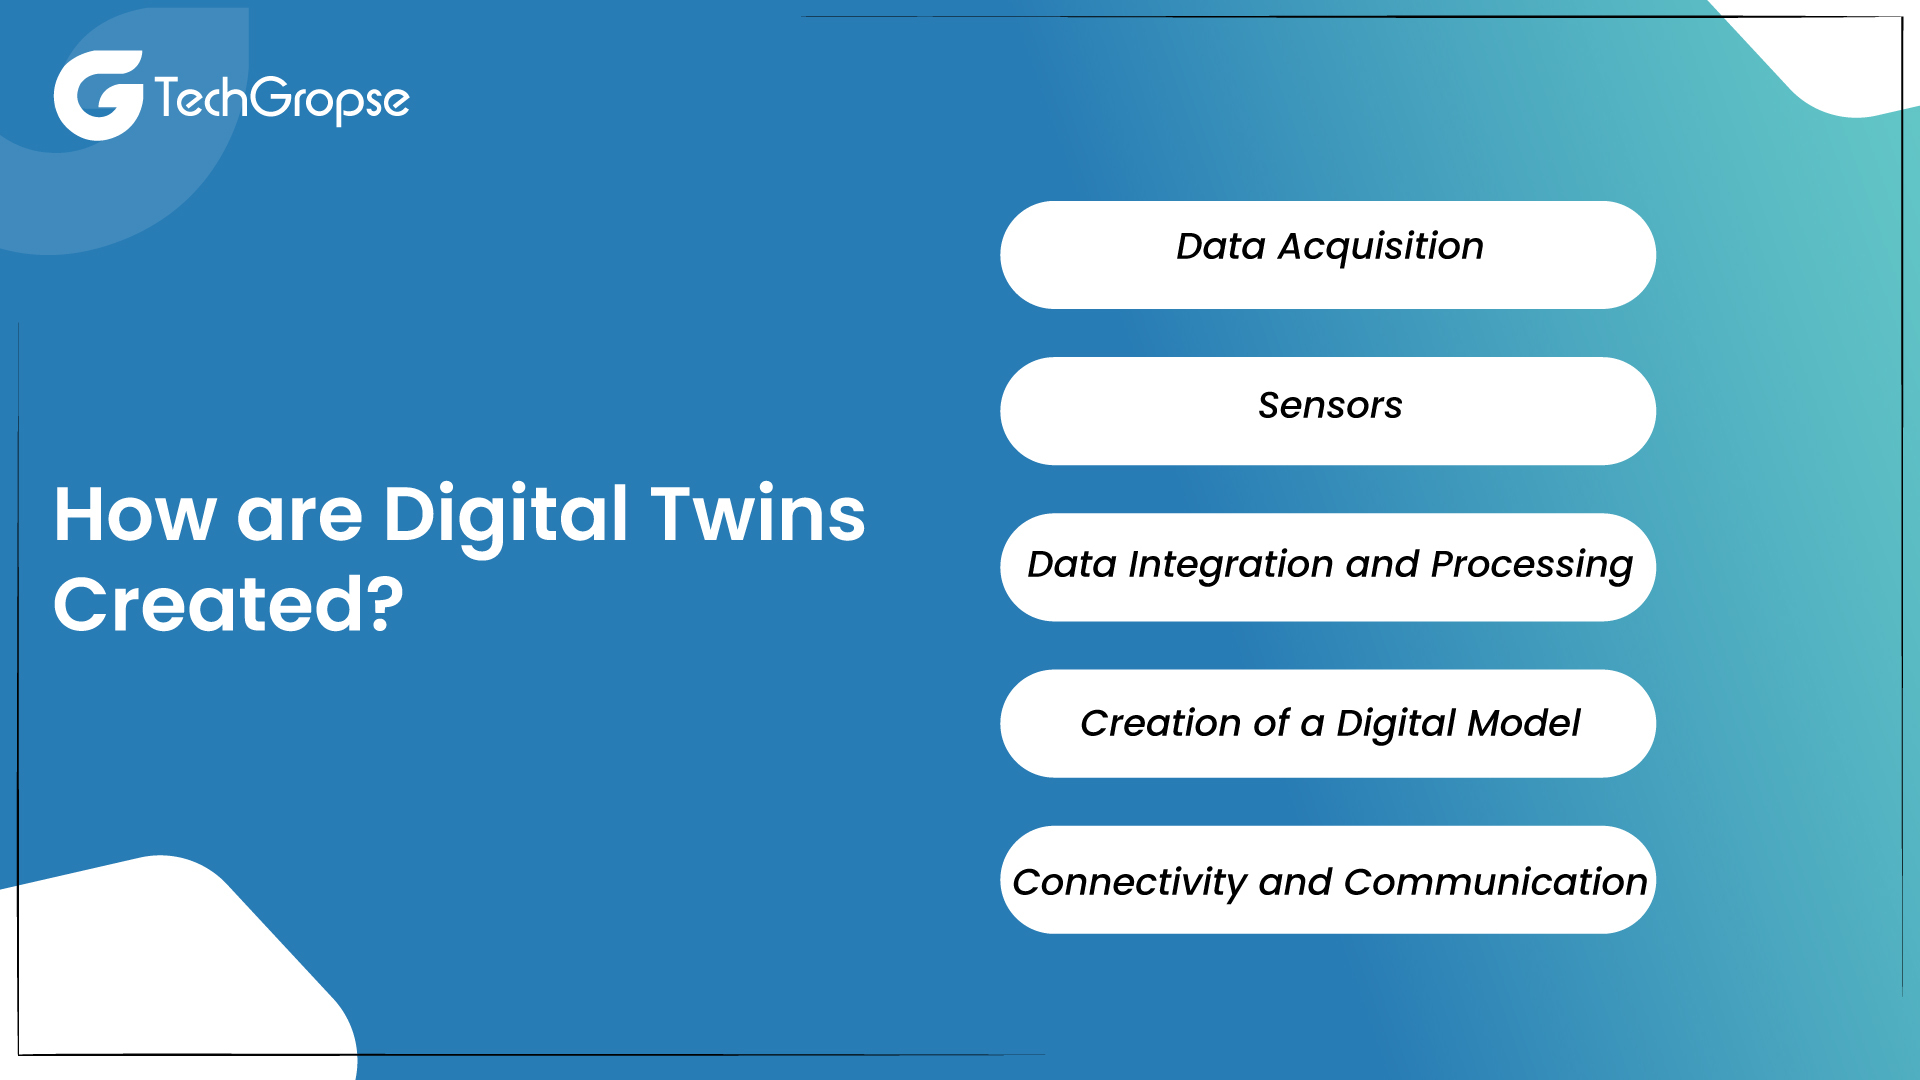 How are Digital Twins Created?